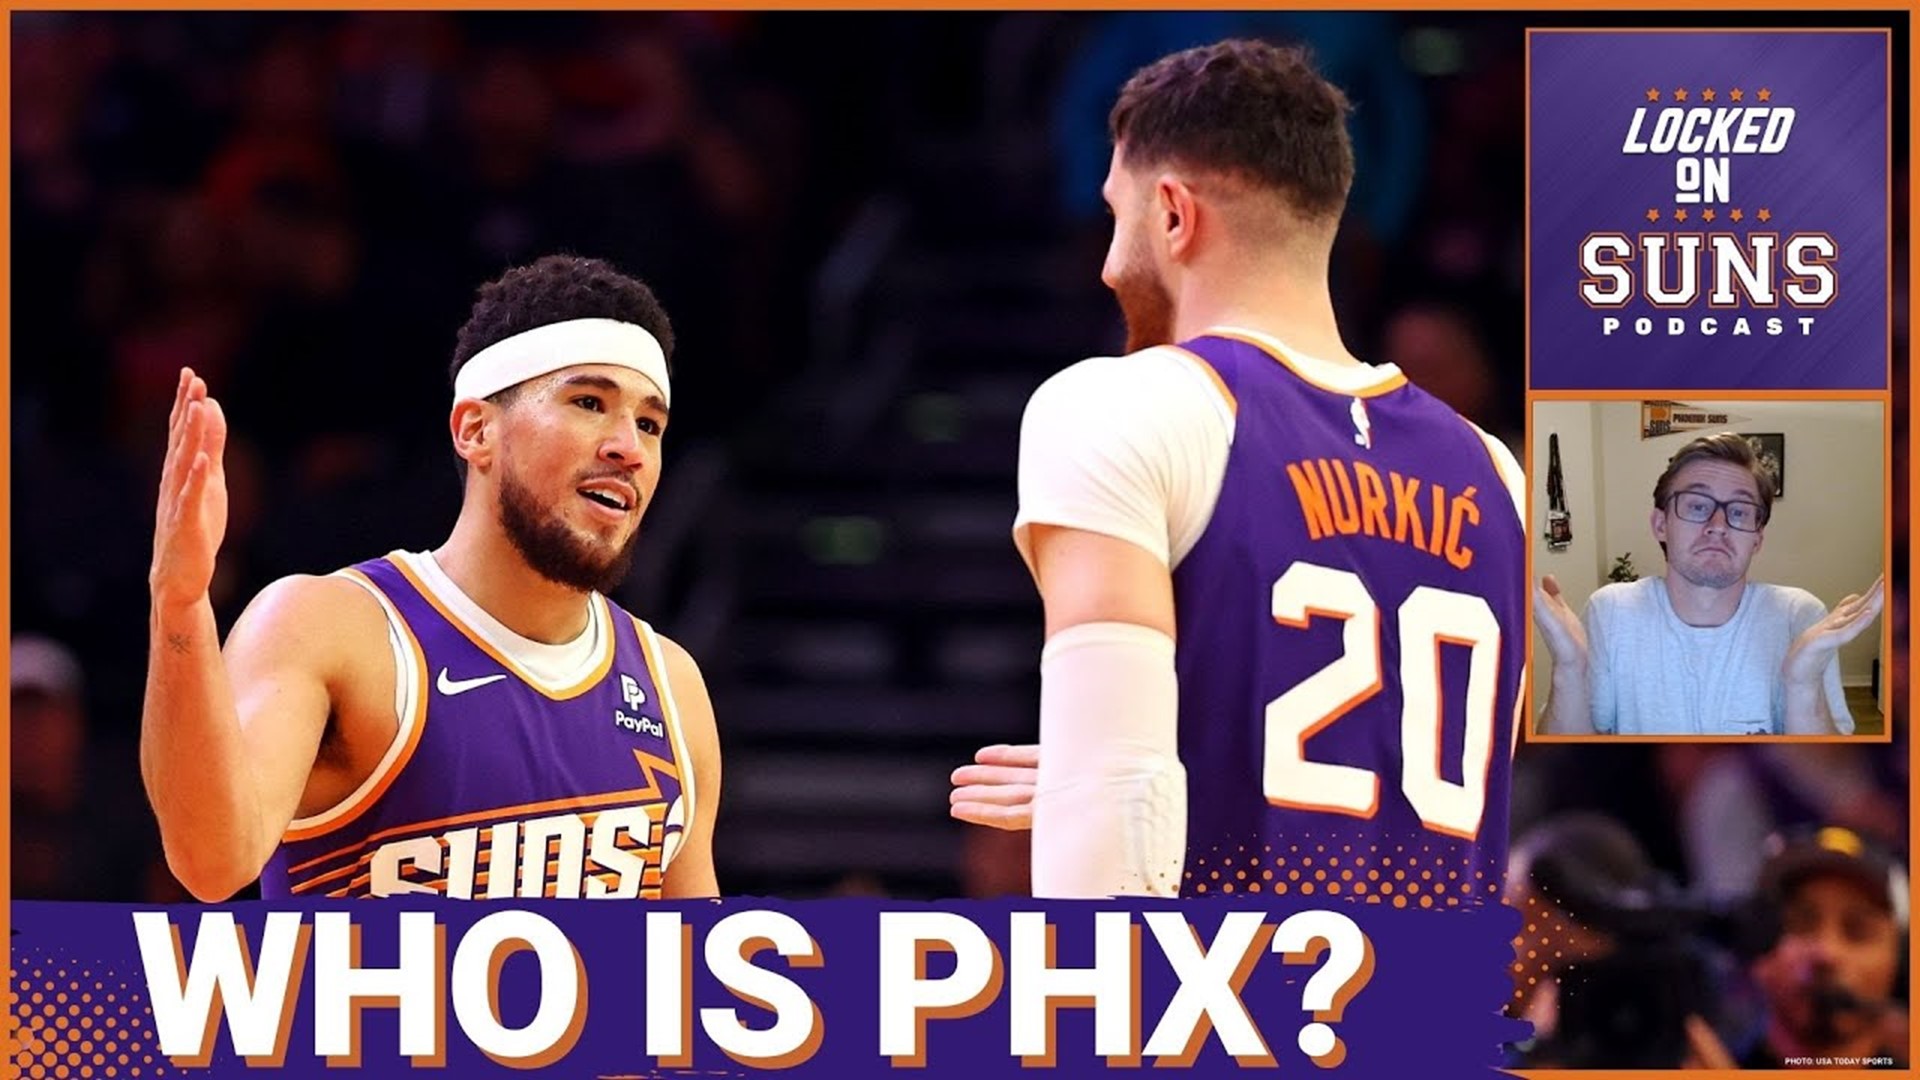 The Phoenix Suns had a rollercoaster season, what can we say for certain about this team heading into the NBA playoffs?